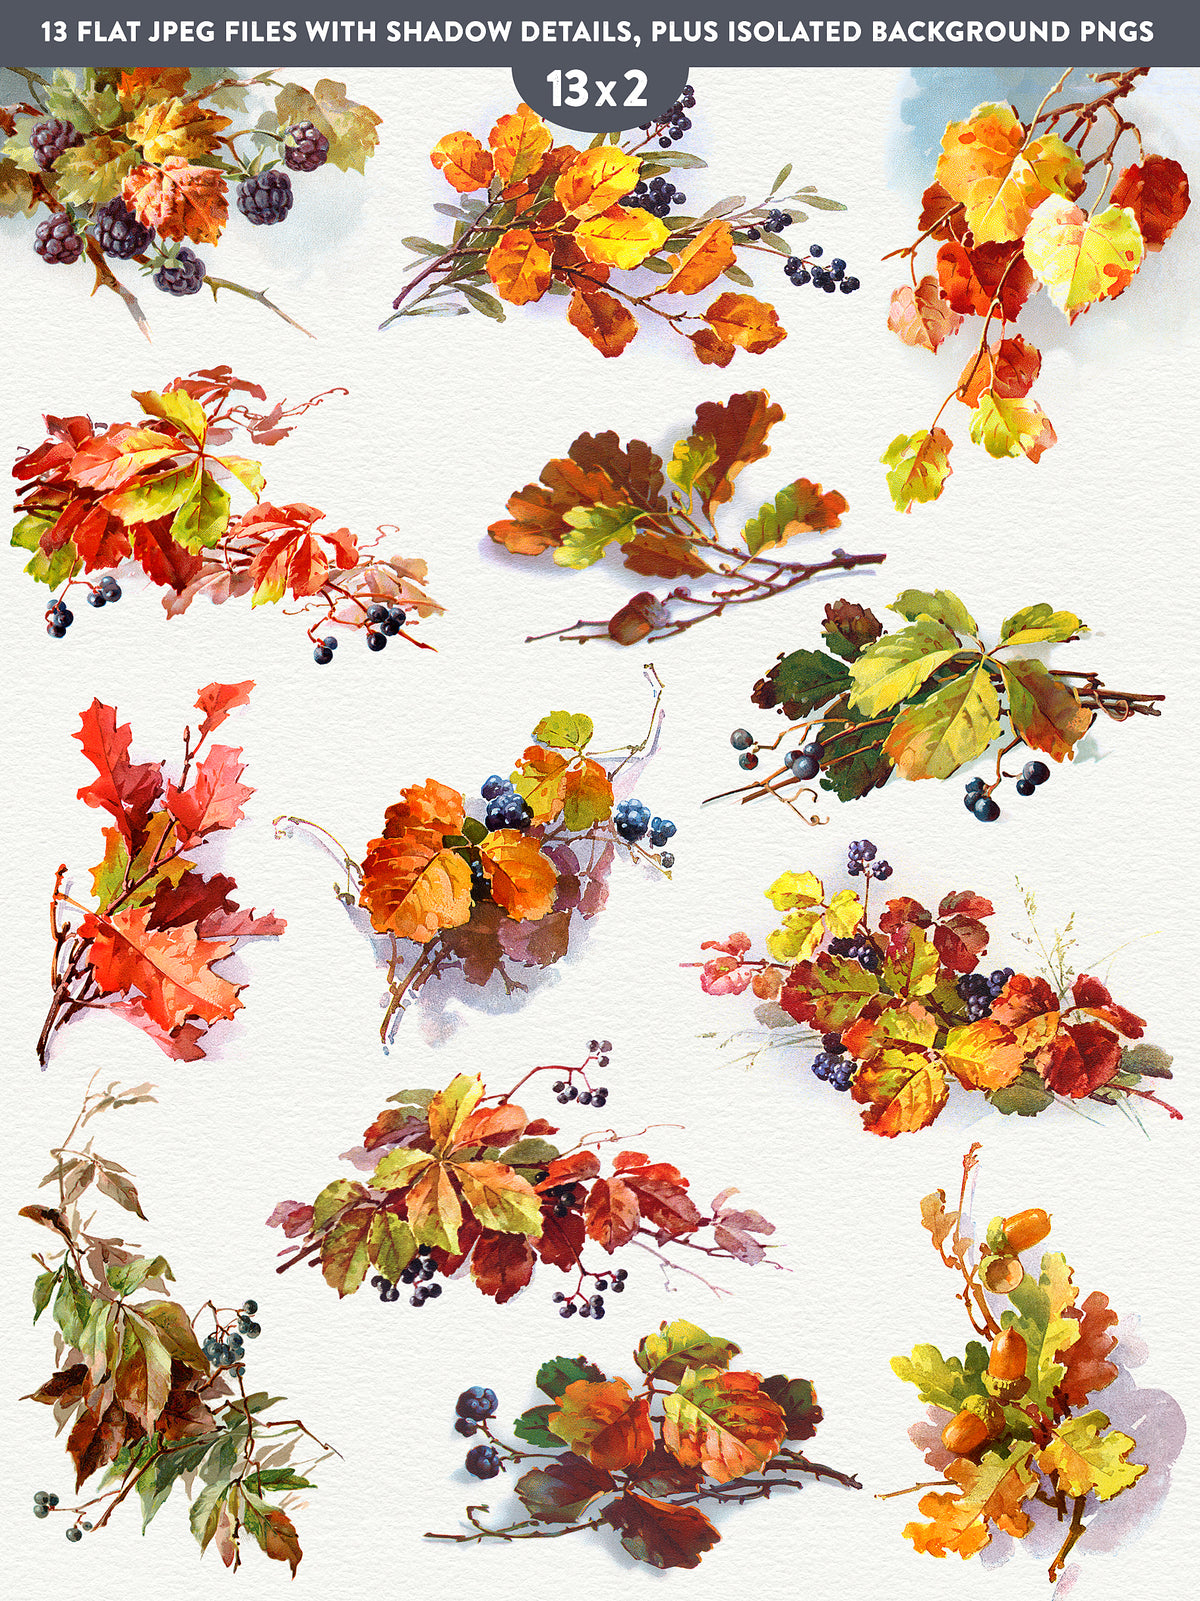 13 vintage illustrations of Fall leaves and berries digital graphics by Catharina Klein.